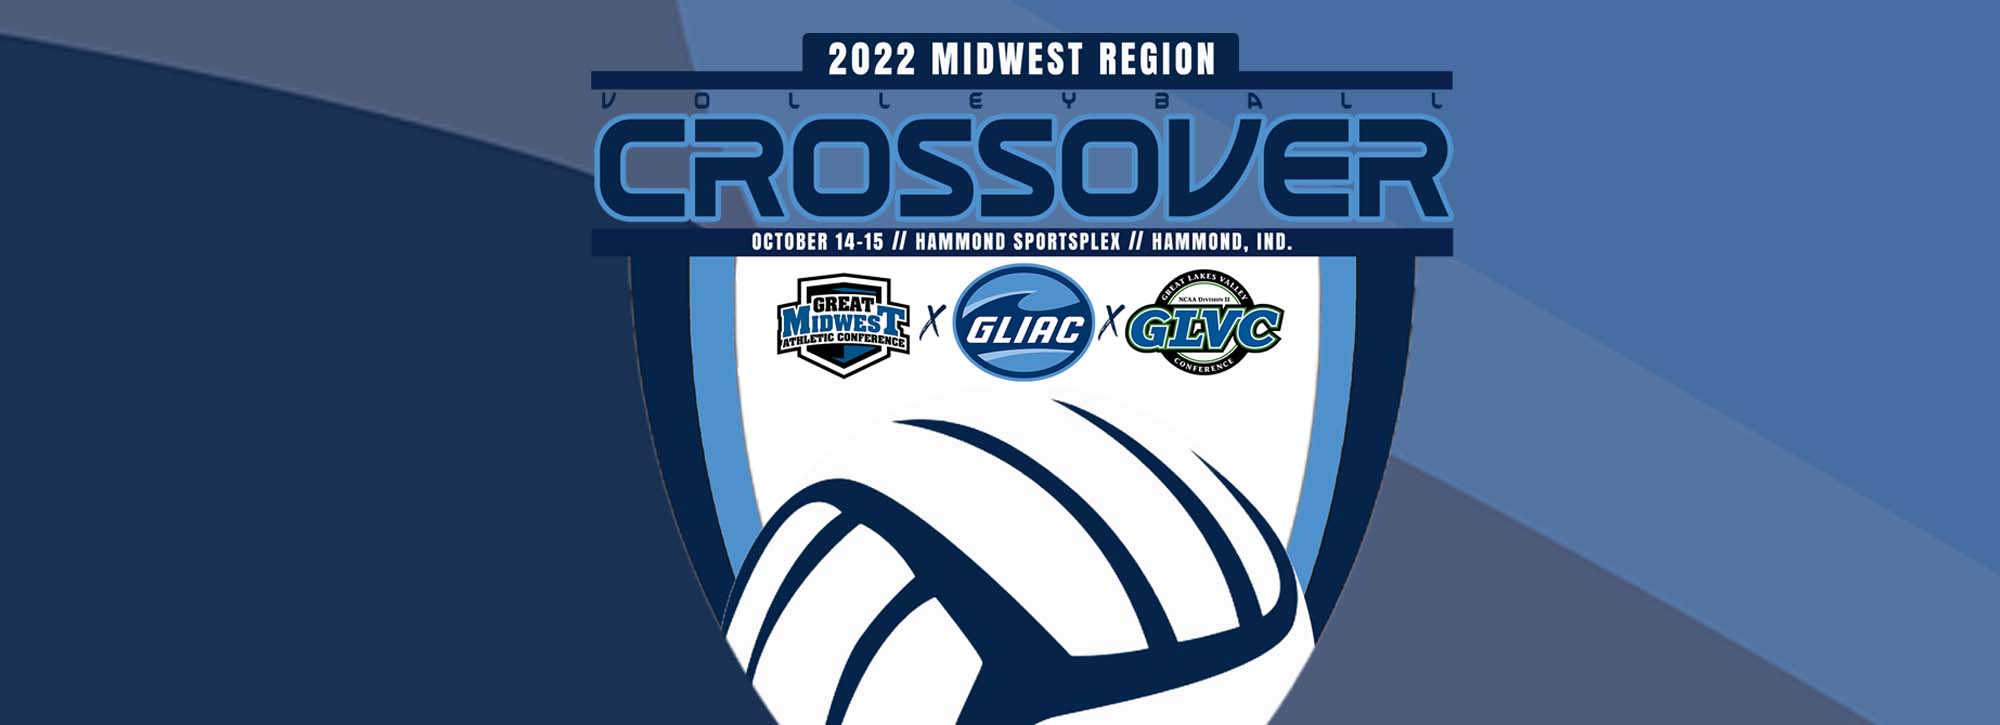 2022 Midwest Crossover returns to Hammond